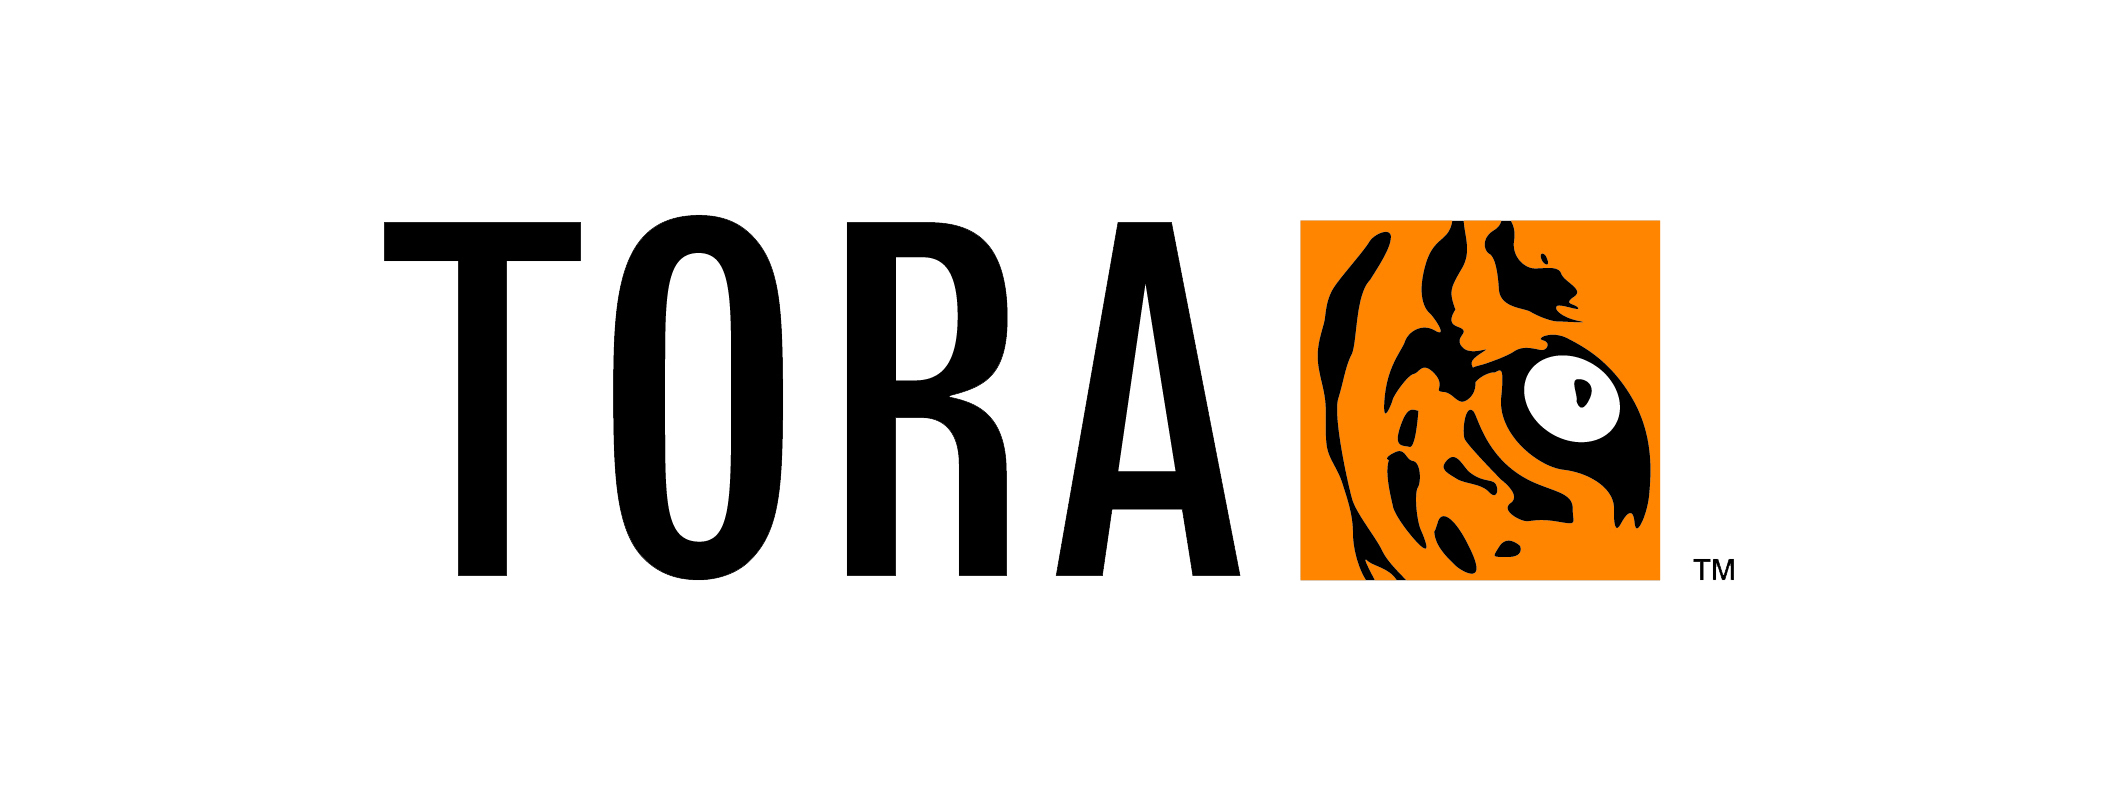 TORA Integrates OEMS Platform with TP ICAP’s Fusion RFQ for Enhanced Single Stock Equity & ETF Trading